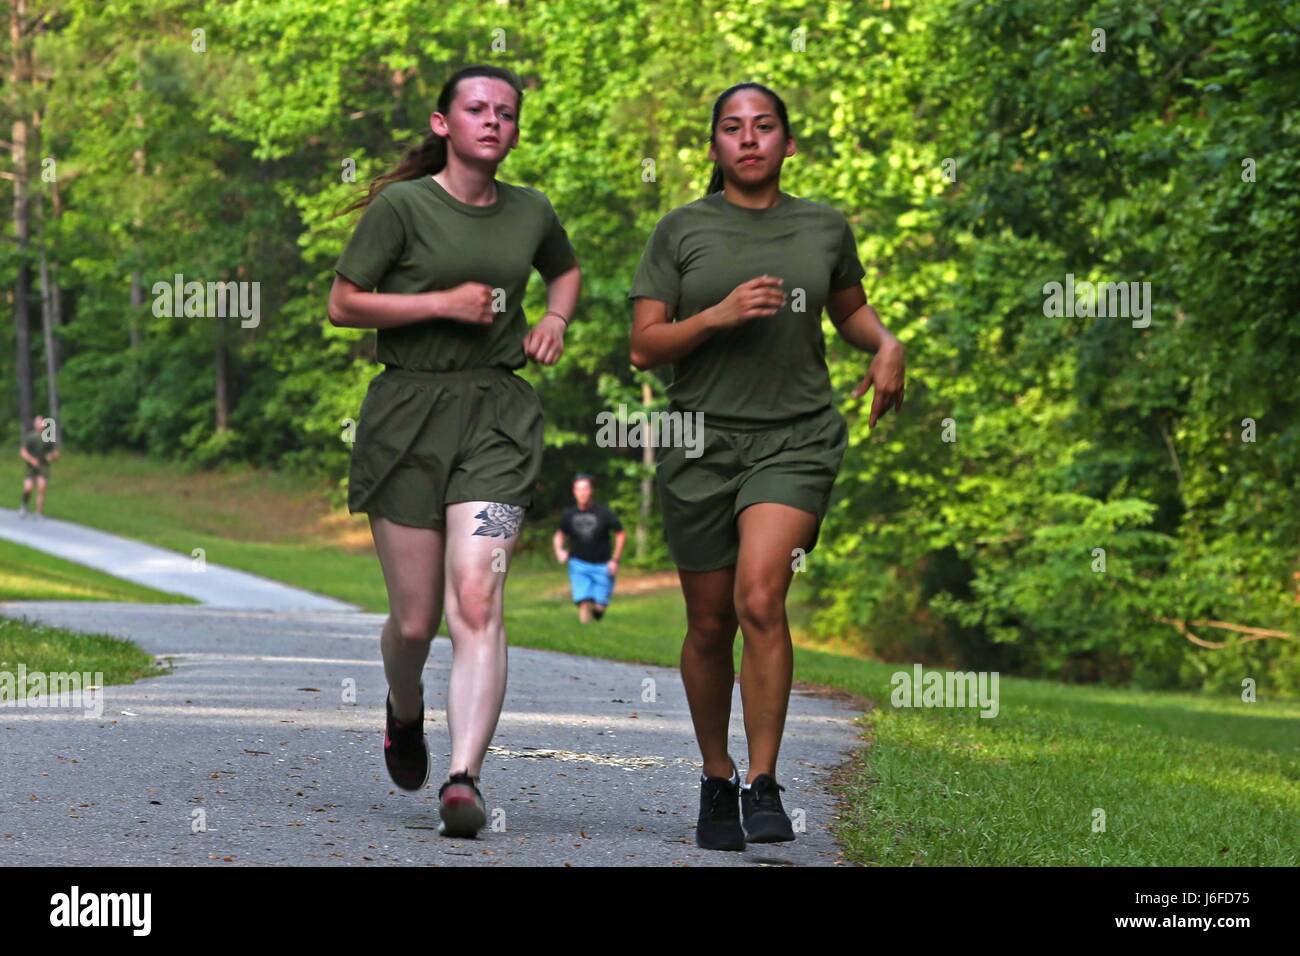 U.S. Marine Corps combat camera personnel from various units within the geographical area, participate in a memorial run to honor fallen combat camera members, Camp Lejeune, N.C., May 11, 2017. Cpl. Sara Medina, a combat photographer, and Lance Cpl. Jacob Hug, a combat videographer, gave the ultimate sacrifice while providing humanitarian assistance and disaster relief to remote villages in Nepal in dire need of aid during Operation Sahayogi Haat. (U.S. Marine Corps photo by Lance Cpl. Kaitlynn M. Hendricks, MCIEAST Combat Camera/Released) Stock Photo